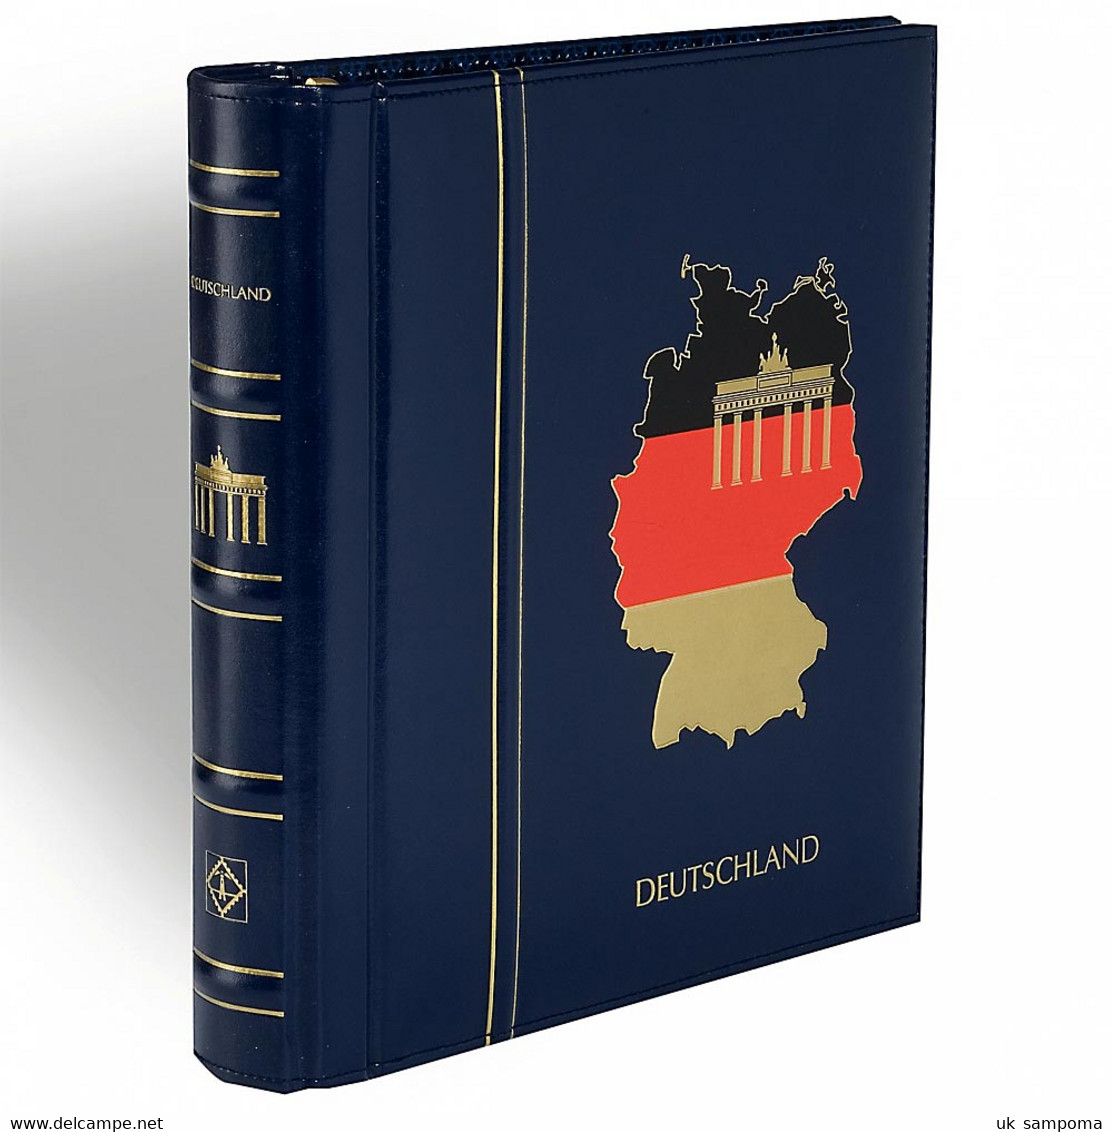 Turn-bar Binder PERFECT DP, Classic Design, GERMANY Imprint, Incl. Slipcase, Blue - Large Format, Black Pages